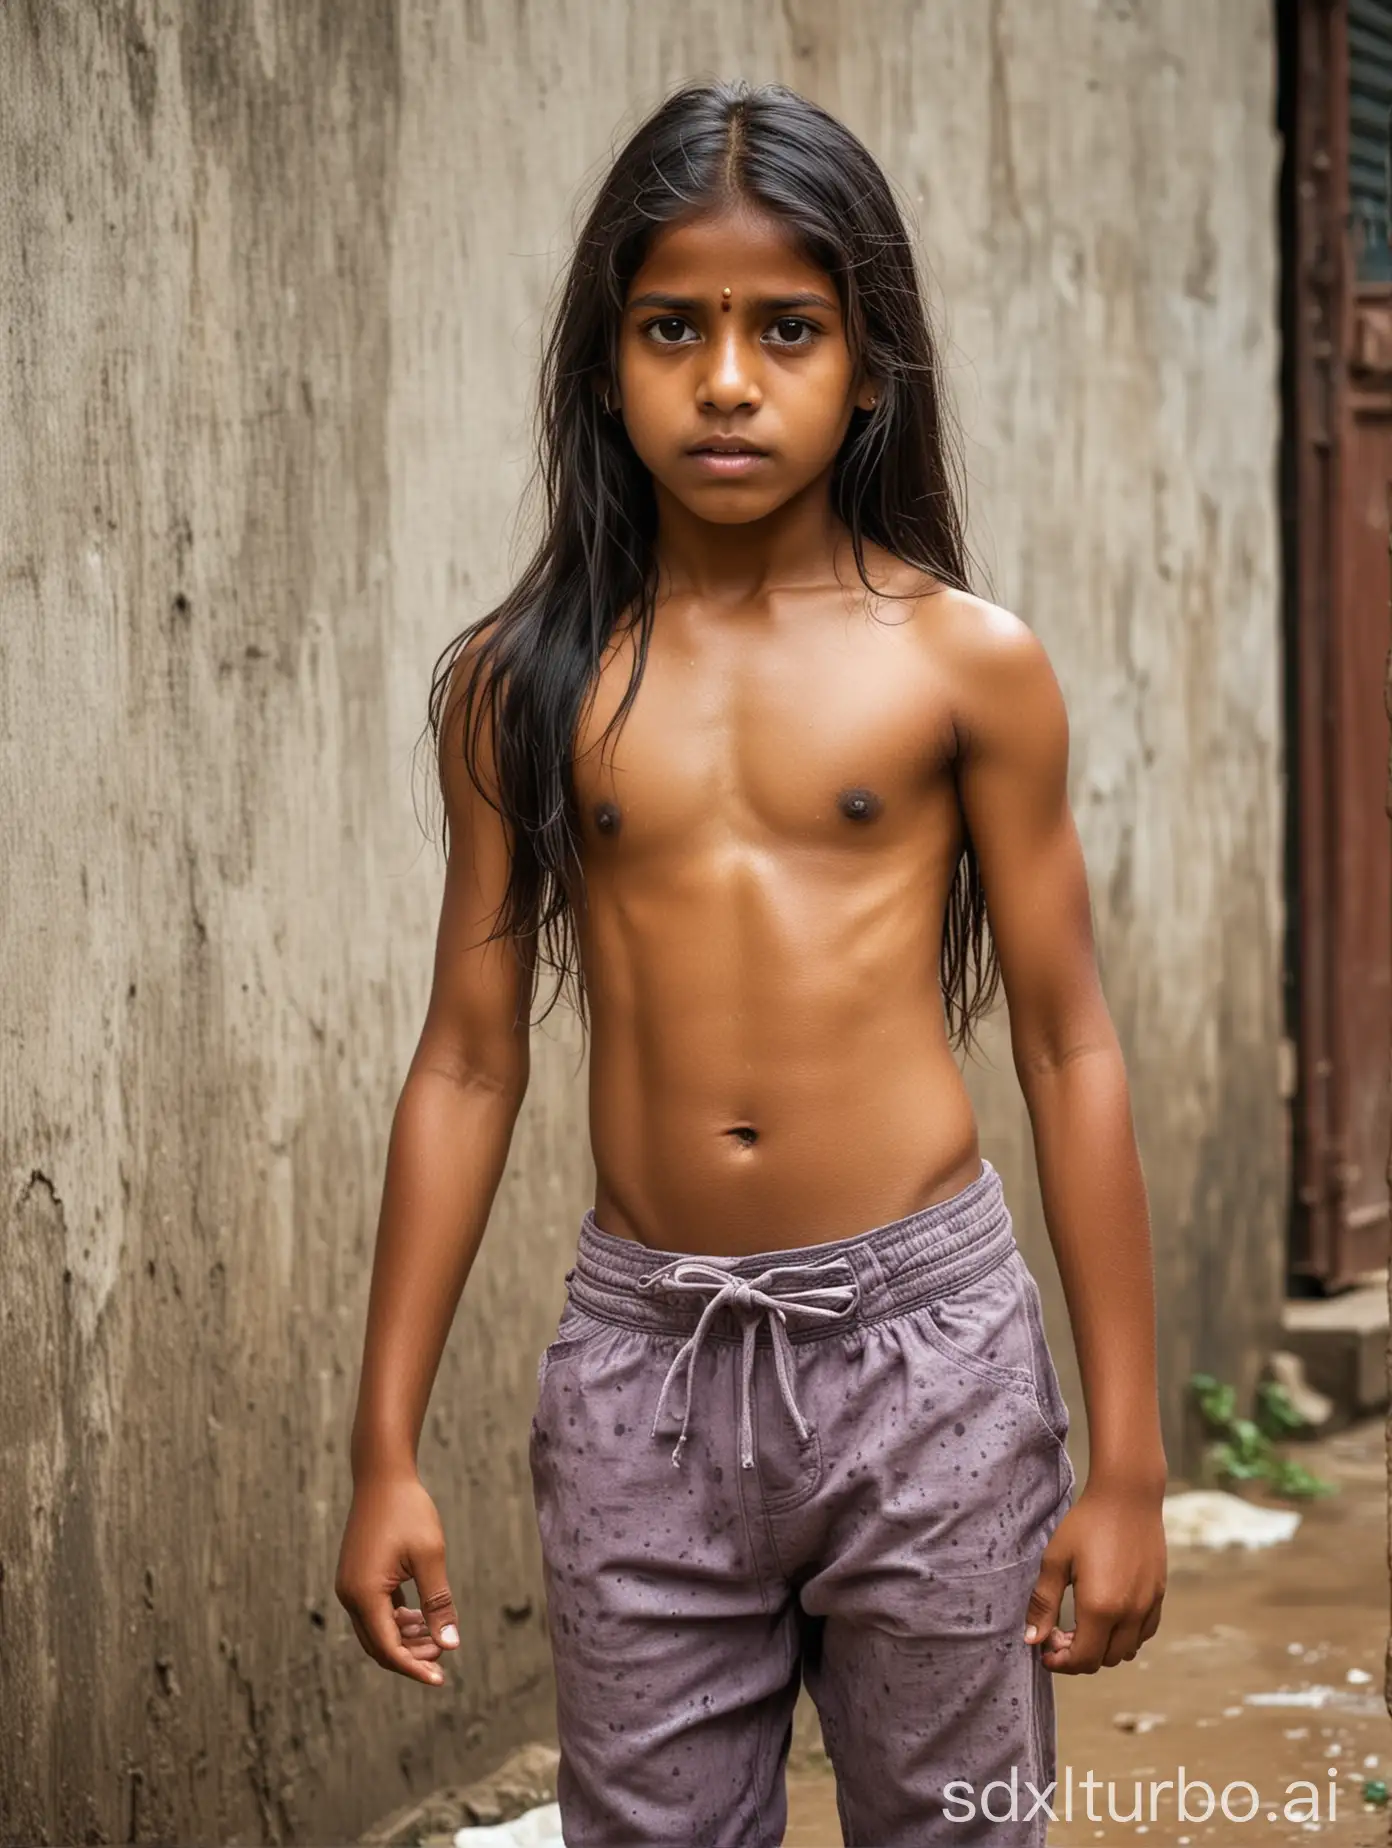 8 years old indian girl, long hair, muscular abs, showing belly, poor neighborhood in India, wet